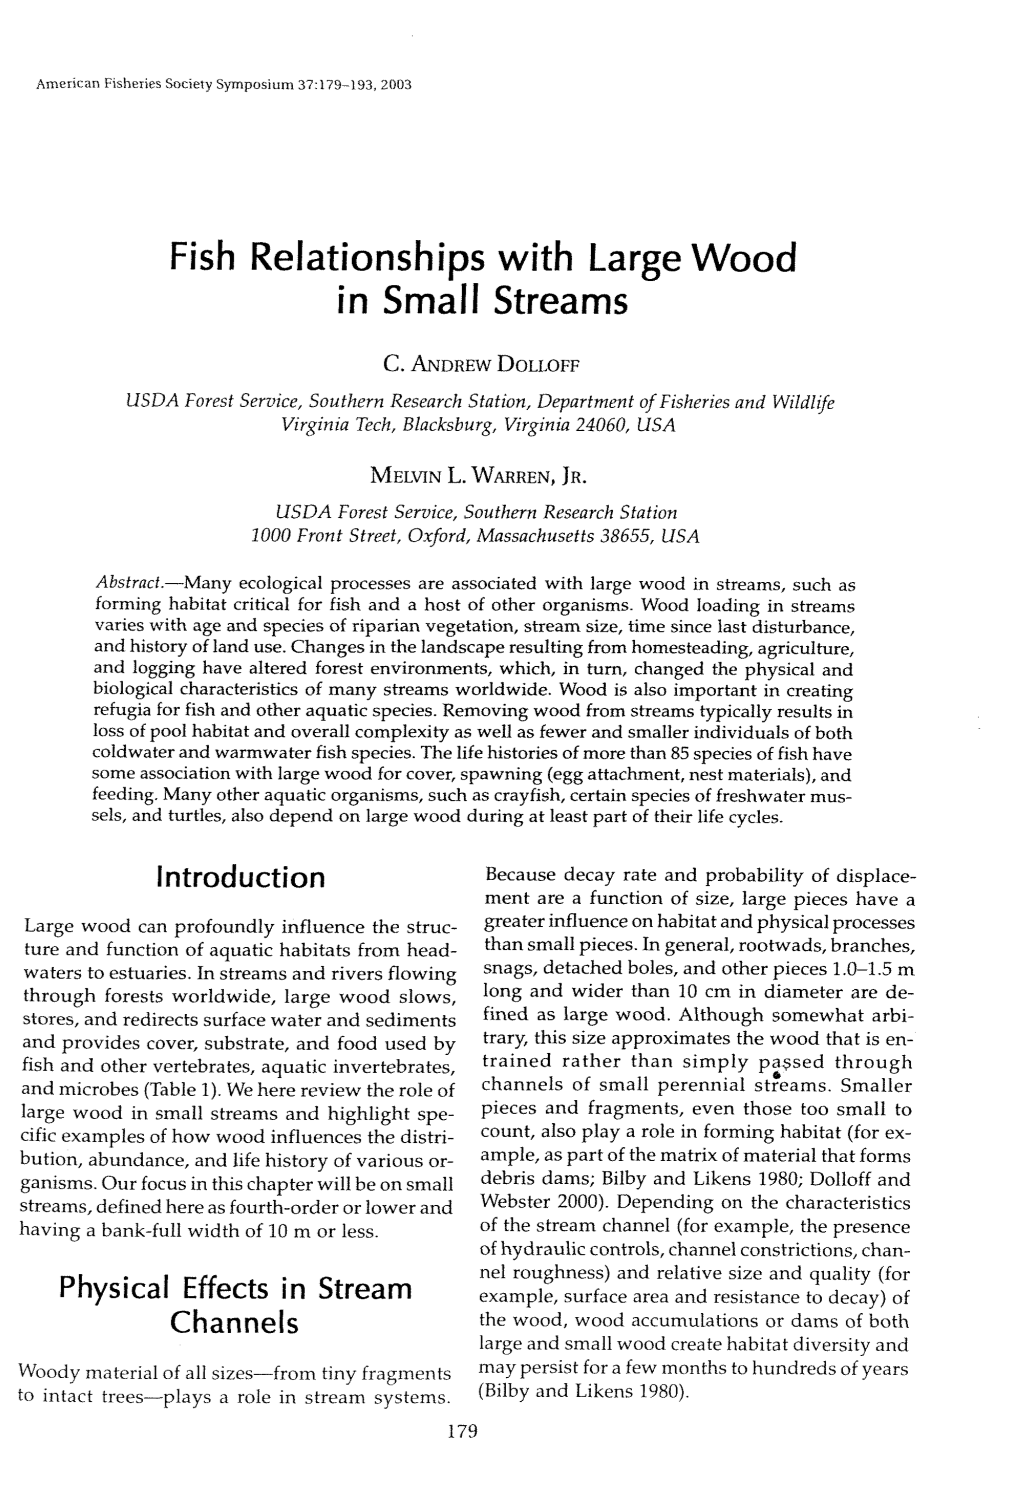 Fish Relationships with Large Wood in Small Streams